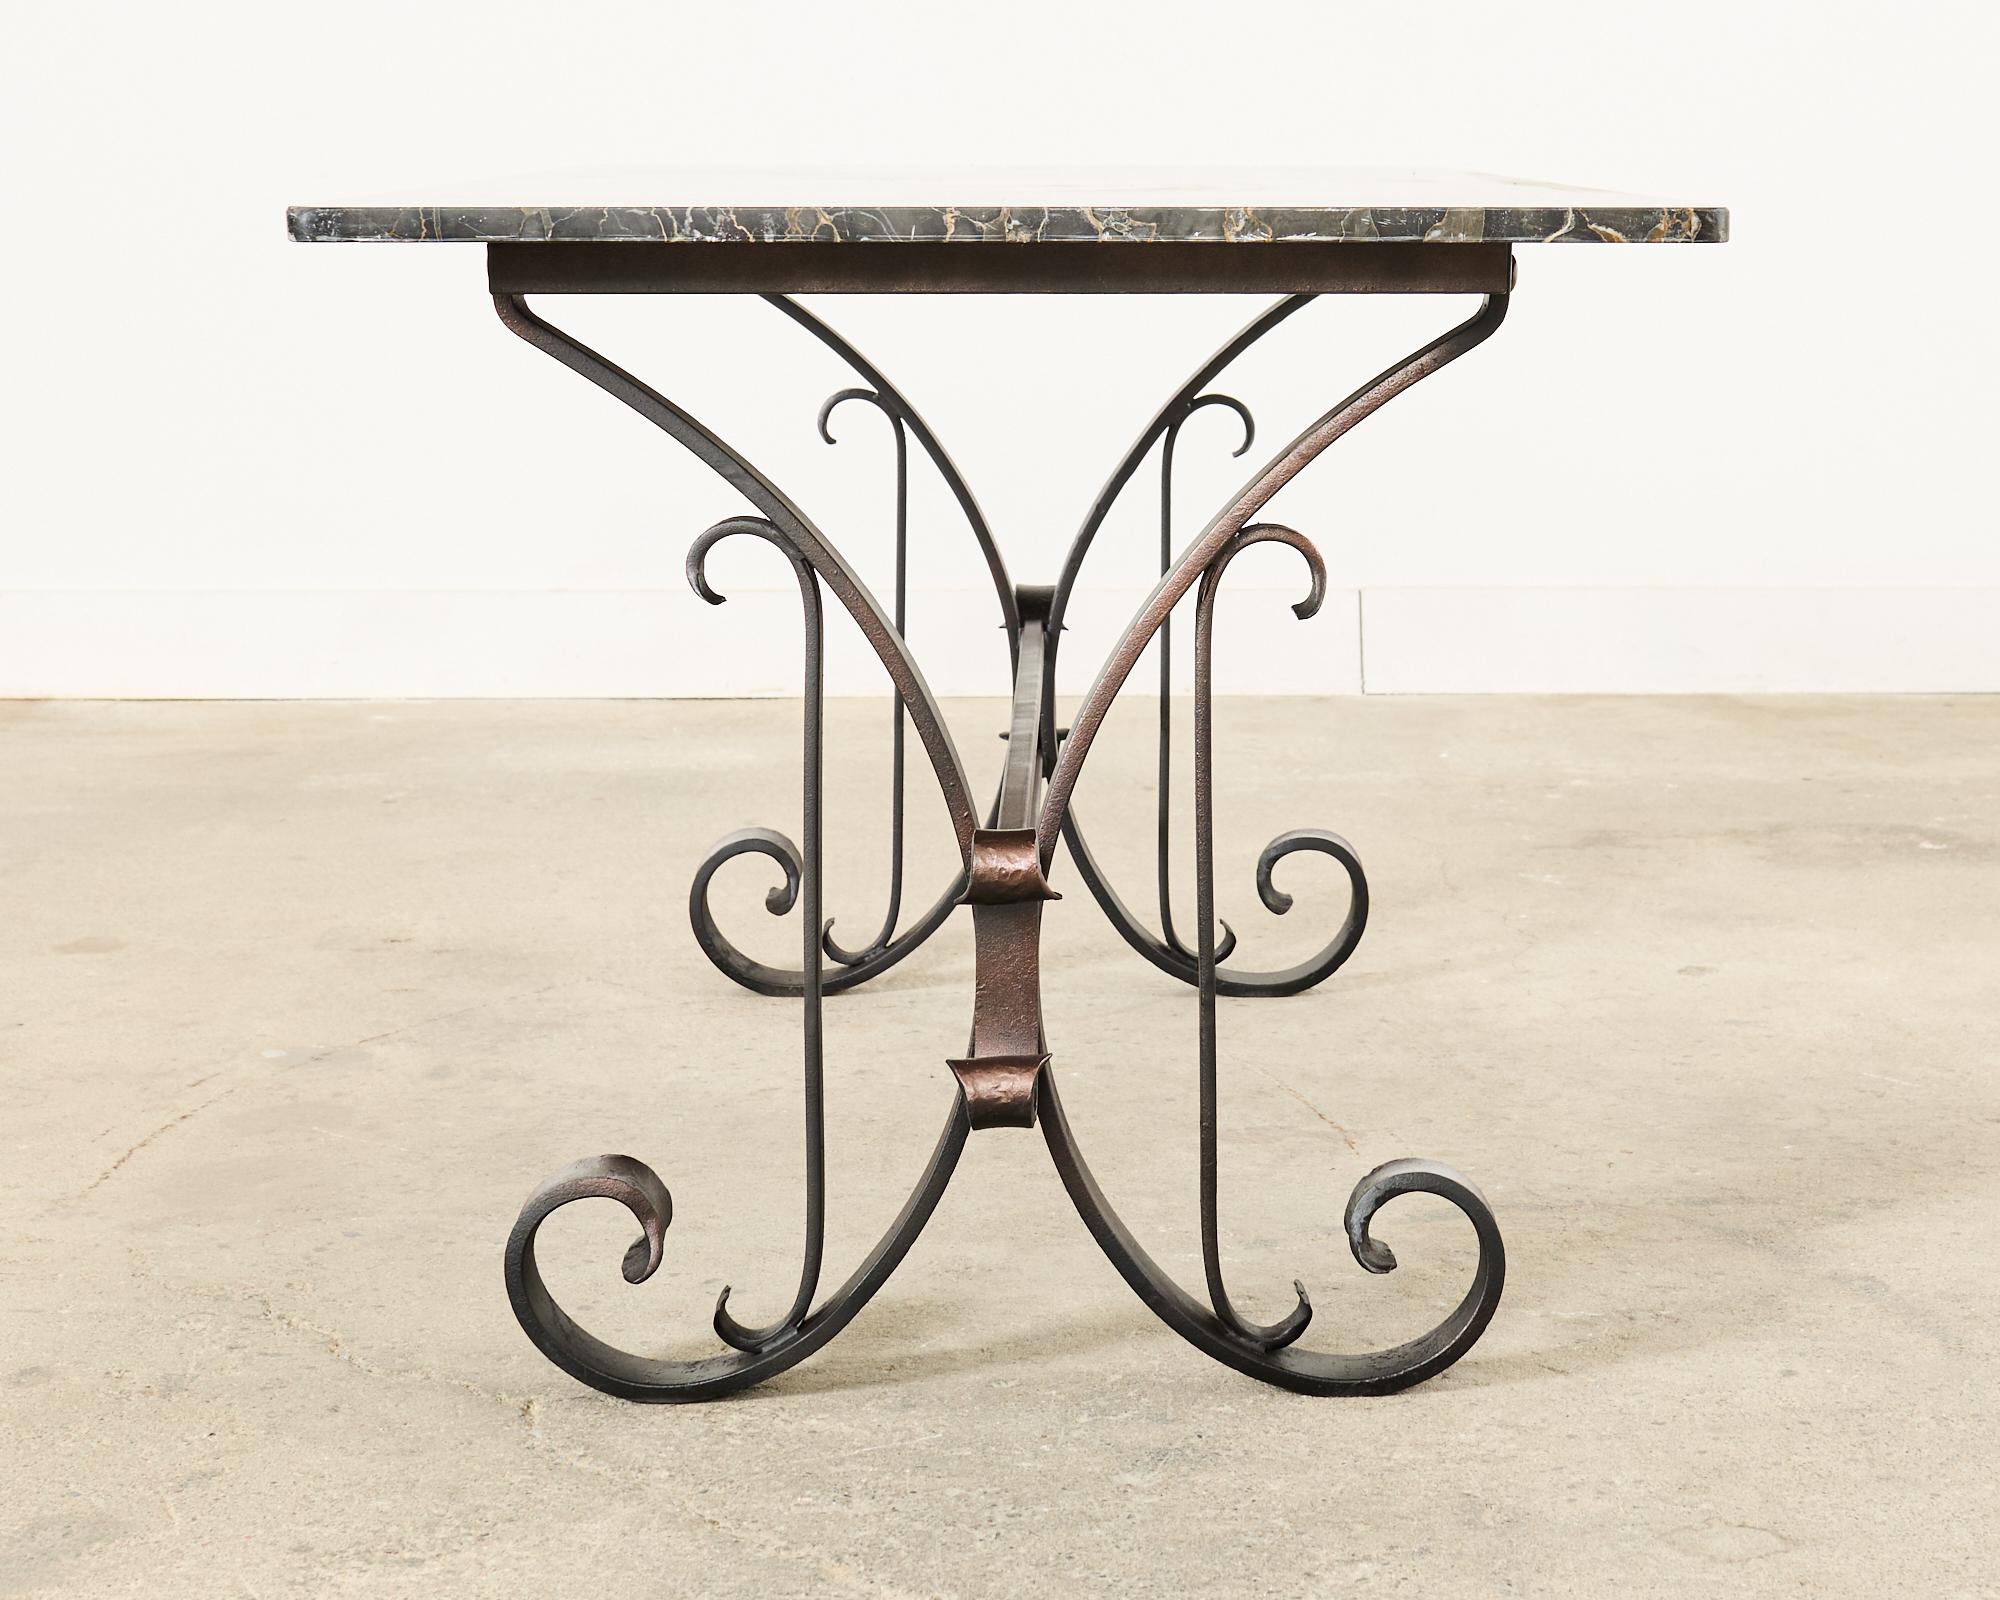 20th Century Italian Wrought Iron and Black Marble Dining Table For Sale